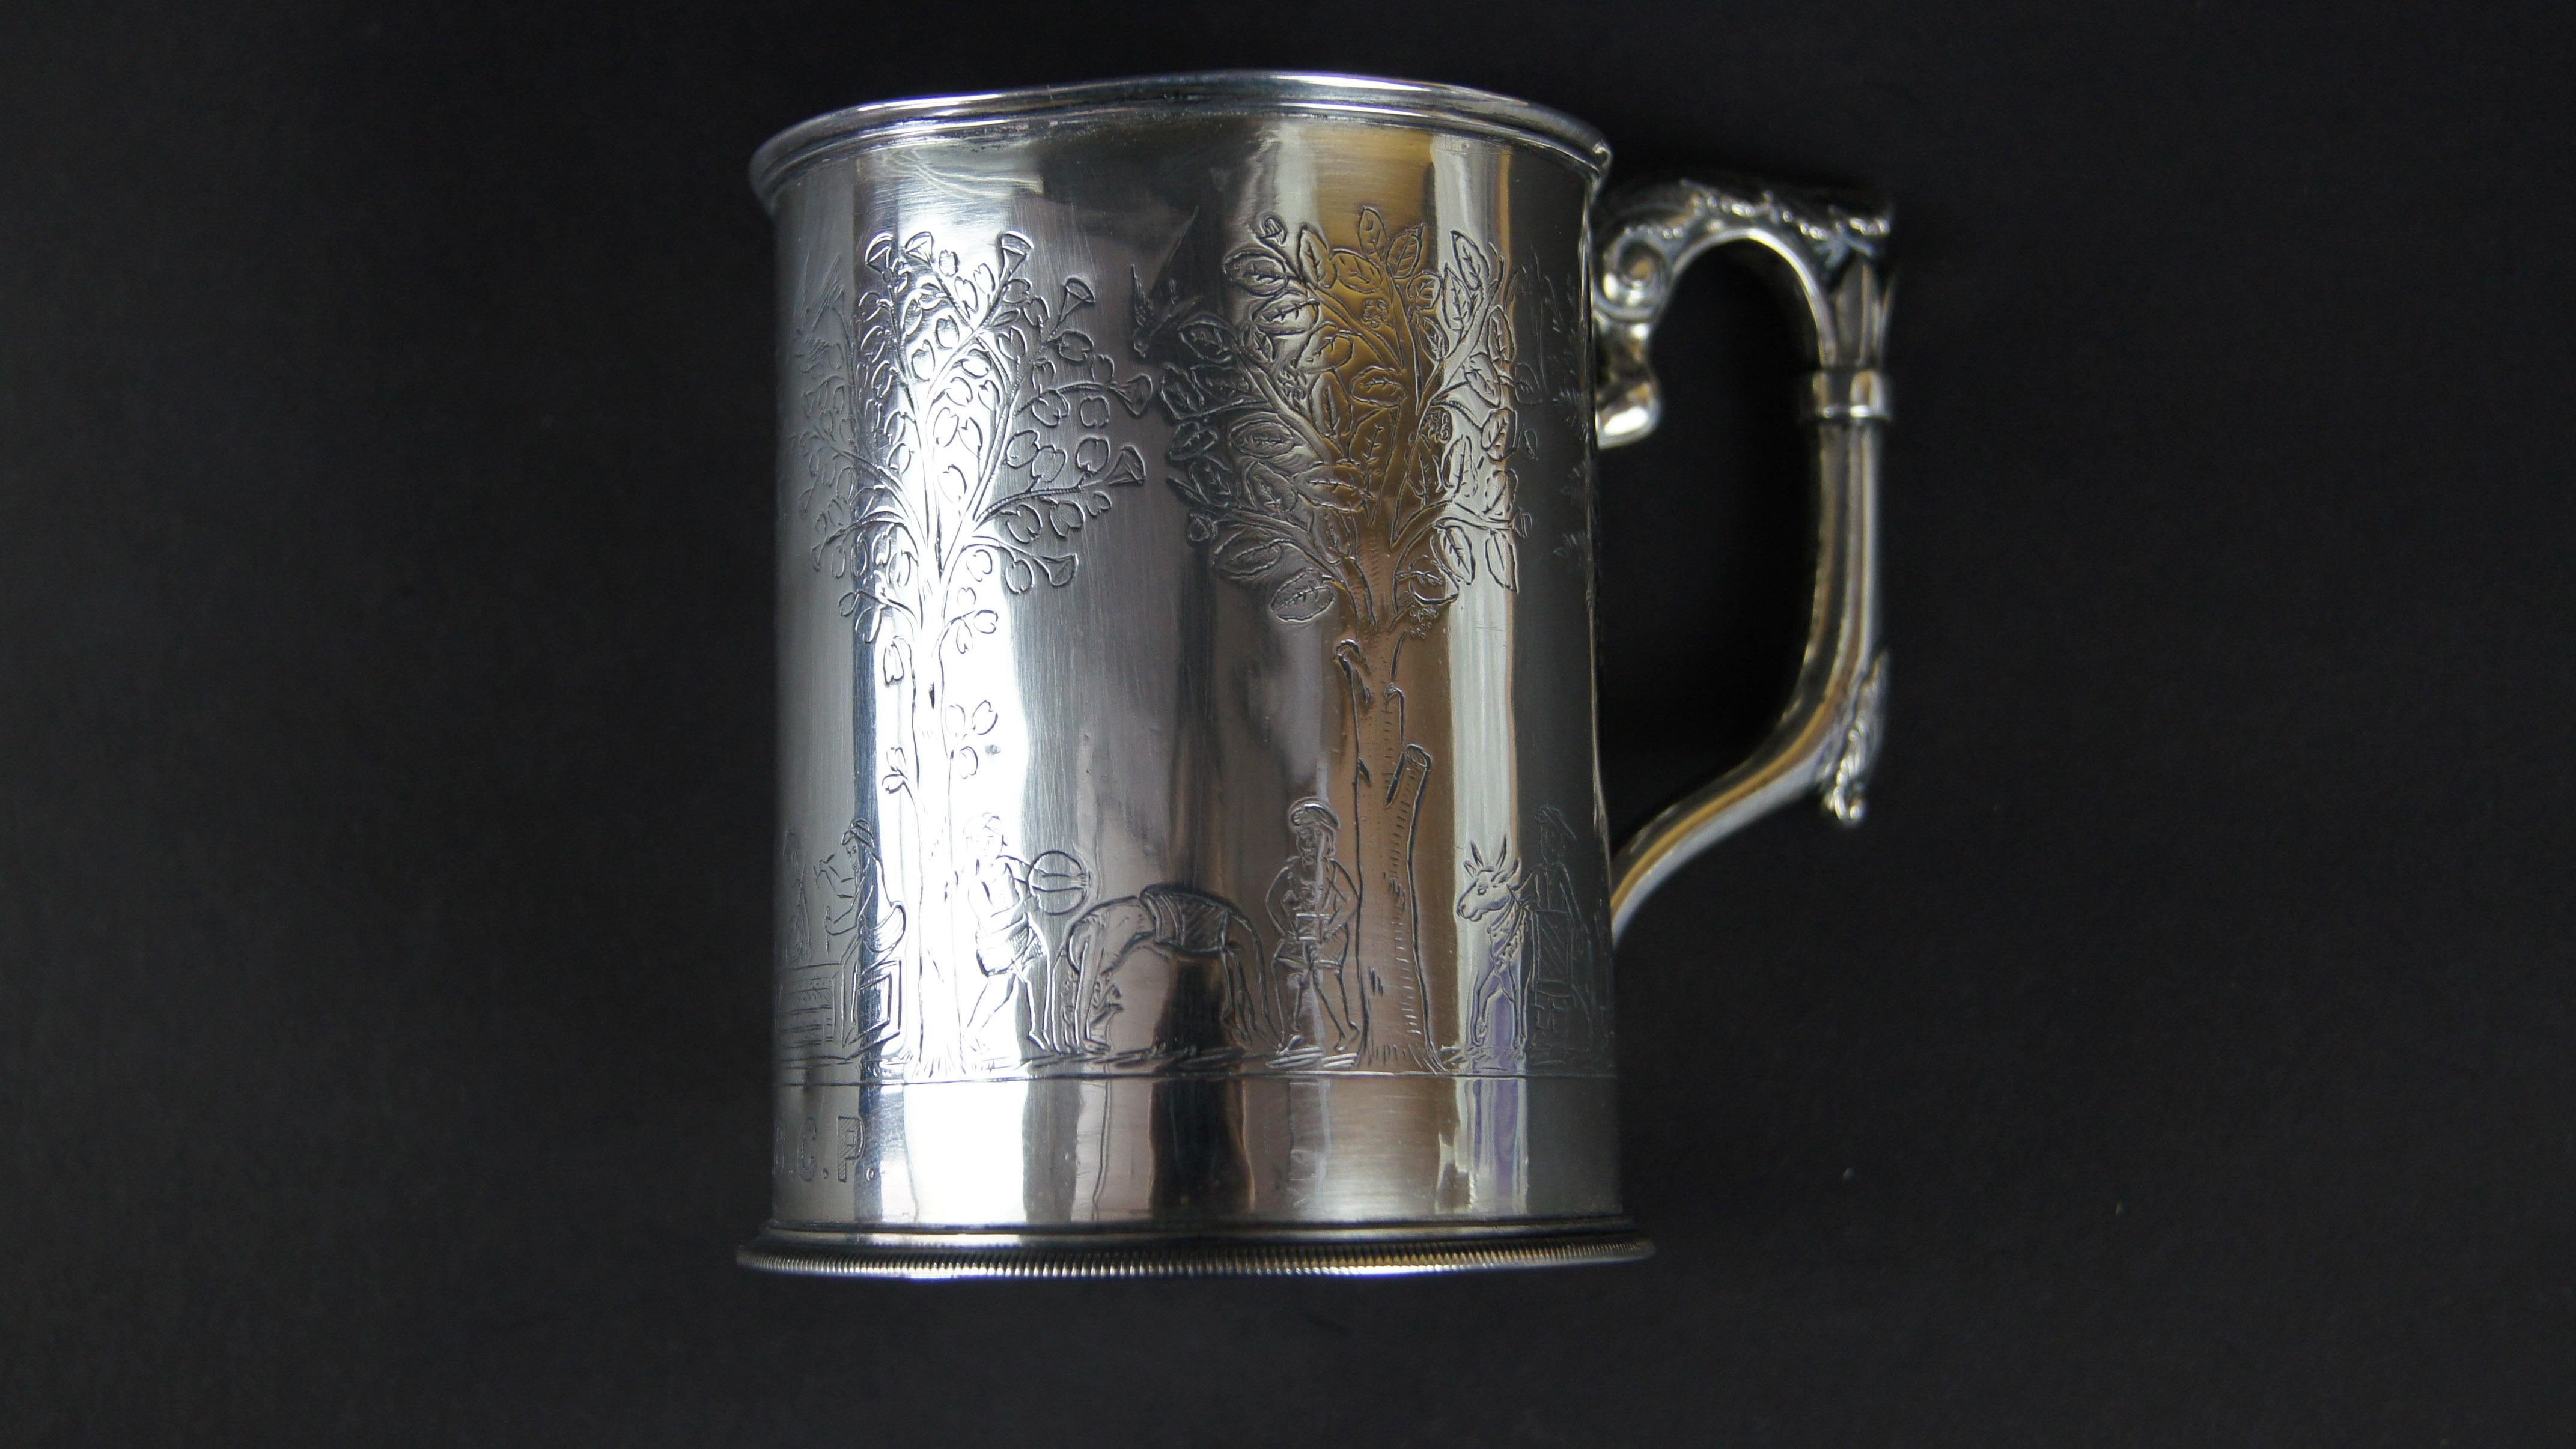 A British colonial silver christening mug by Peter Nicholas Orr, Madras, India, circa 1860. With an acanthus leaf capped handle, engraved with village life scenes, engraved with initials E.B.C.P., underneath stamped ORR, 5oz.